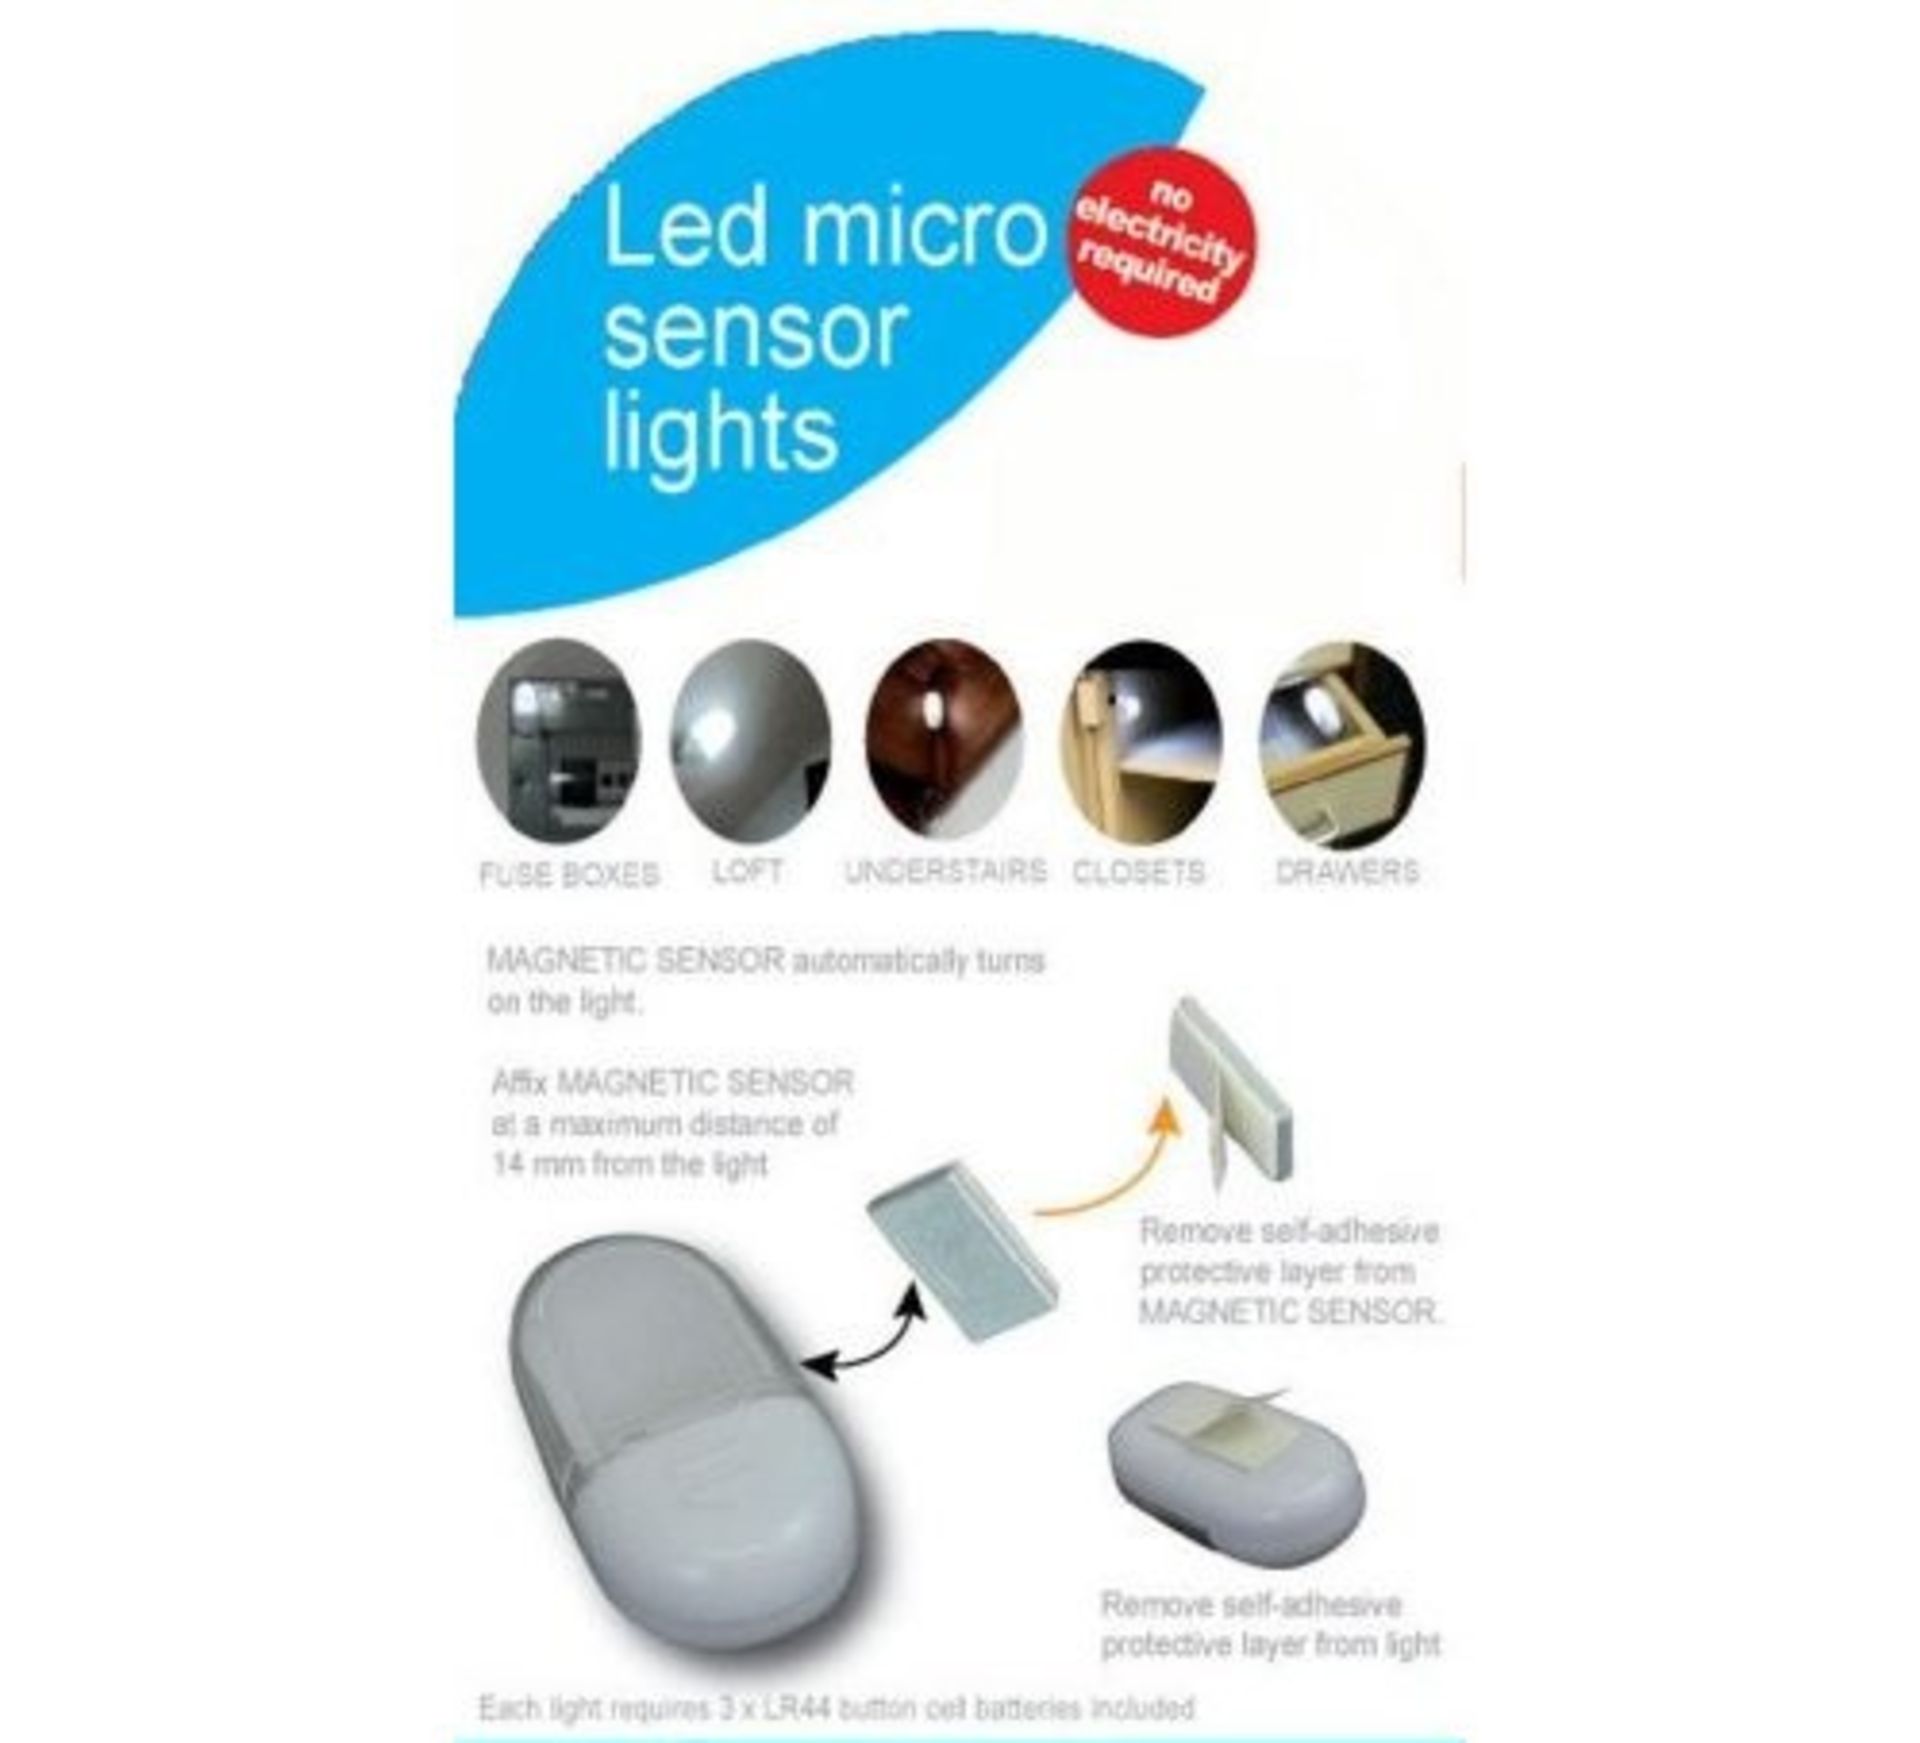 V Brand New Tritronic LED Micro Sensor Lights - Magnetic Sensors - No Electricity Required -